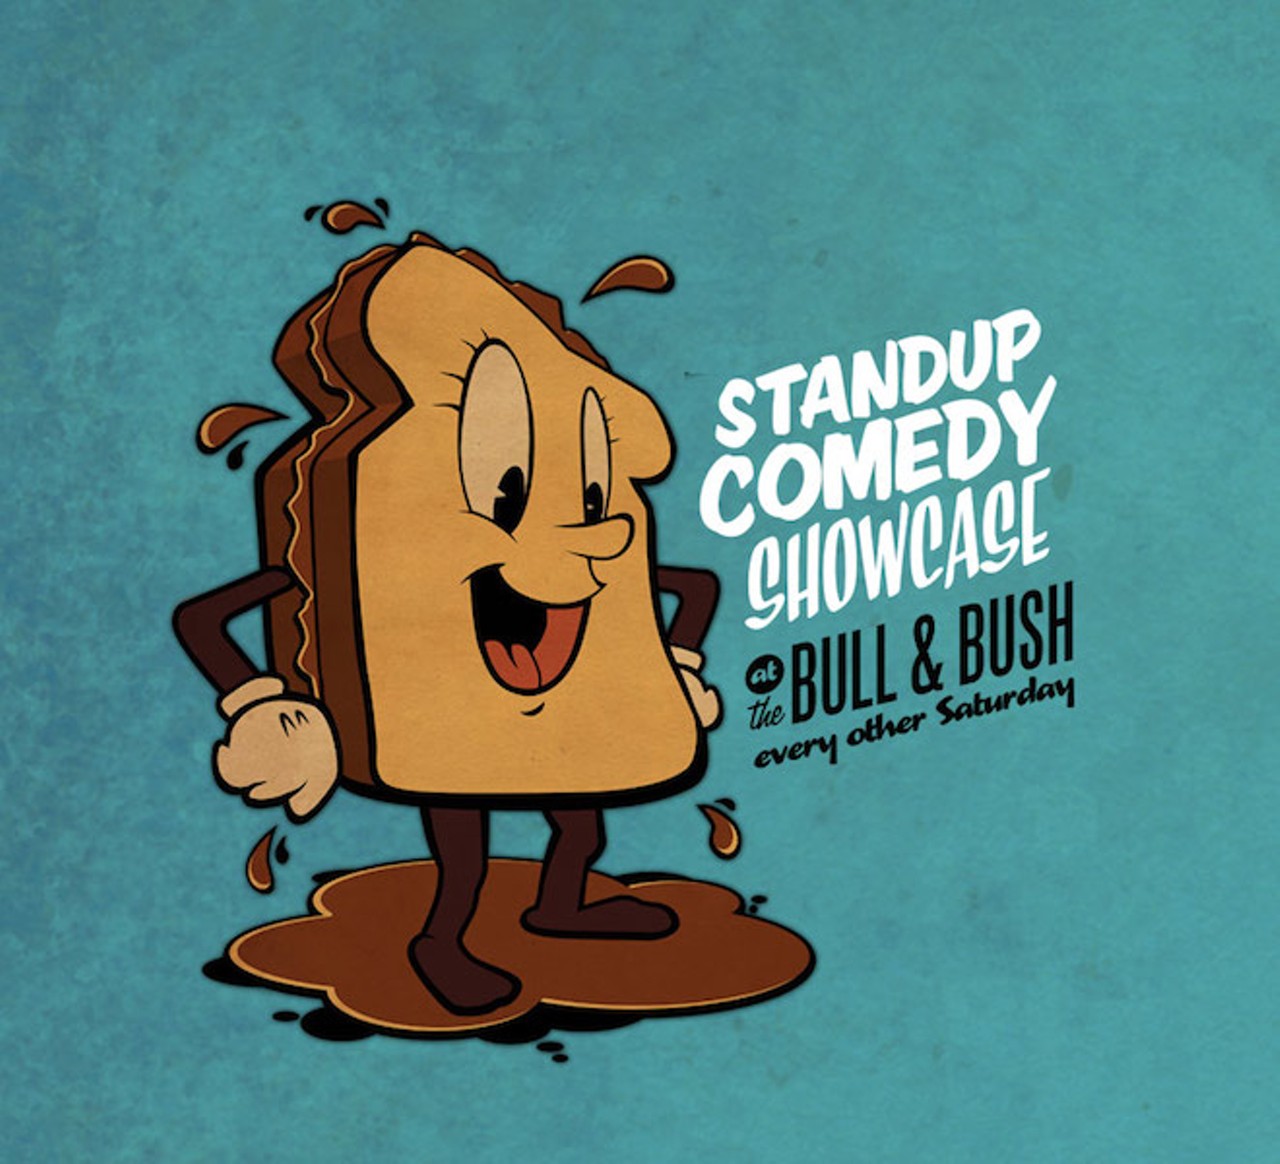 Shit Sandwich Comedy Showcase
9-10:30 p.m. every first and third Saturday, Bull & Bush, 2408 E. Robinson St., 407-896-7546, free
For those looking for a laugh, meet a rotating lineup of funny folks at one of the town&#146;s best underground comedy showcases.Photo via Shit Sandwich on Facebook